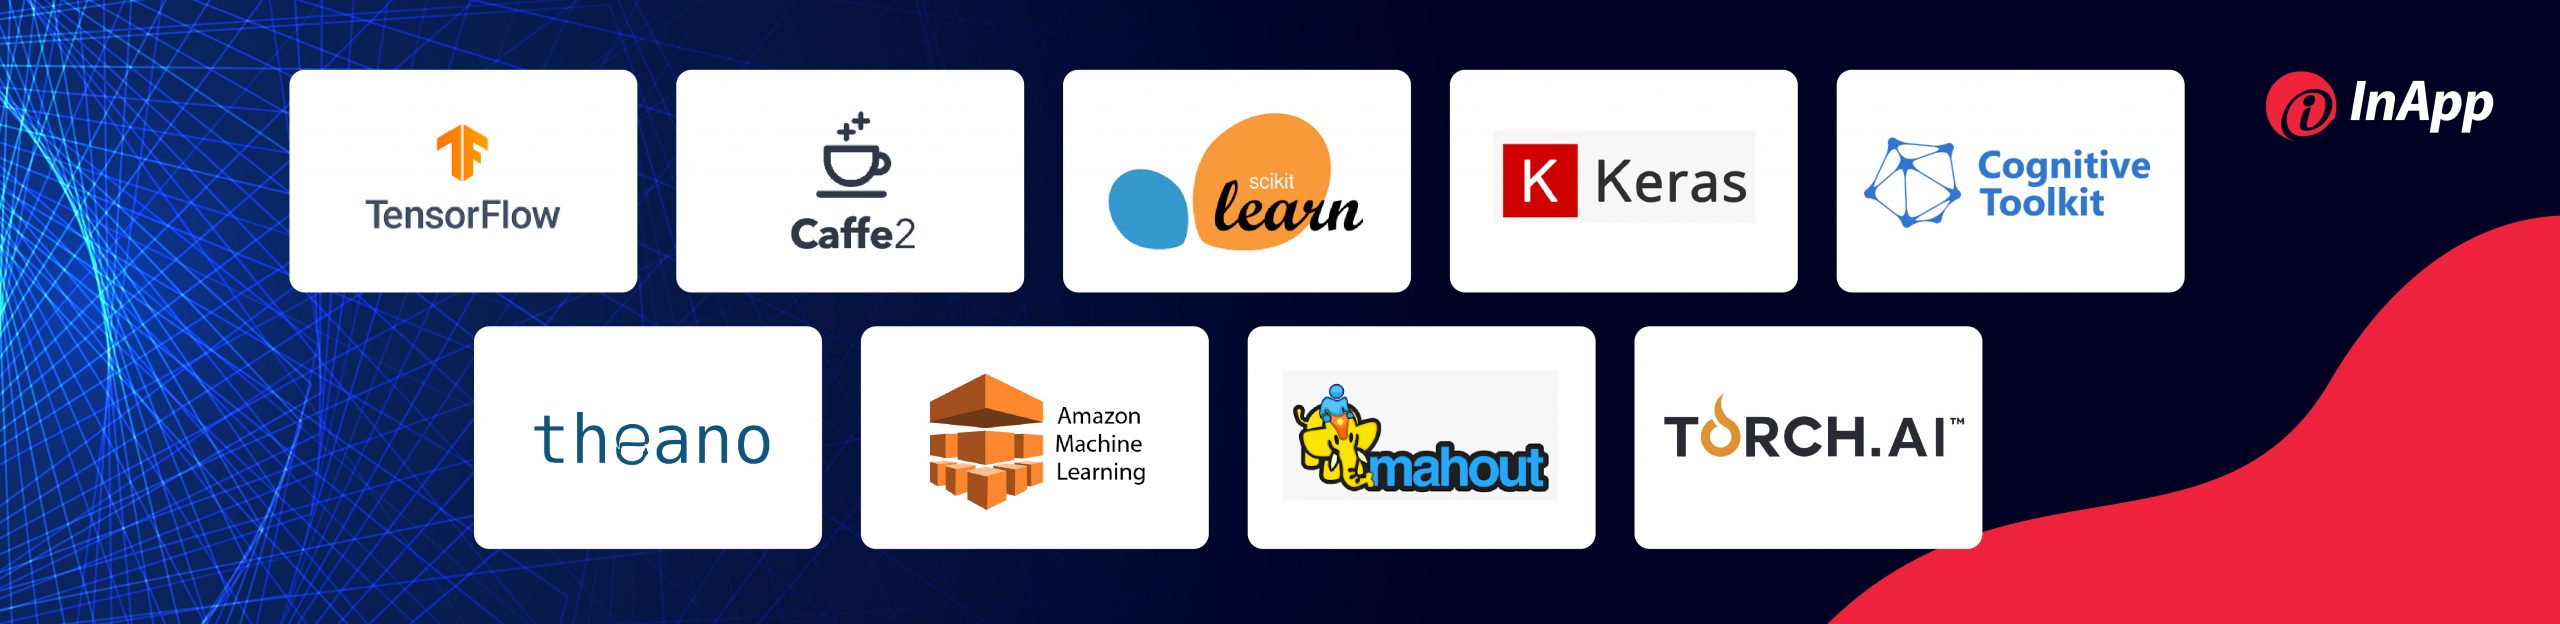 Top Artificial Intelligence Frameworks and their Pros and Cons - Tensor Flow, Caffe, Scikit Learn, Keras, Microsoft CNTK, Theano, Amazon Machine Learning, Apache Mahout, Torch